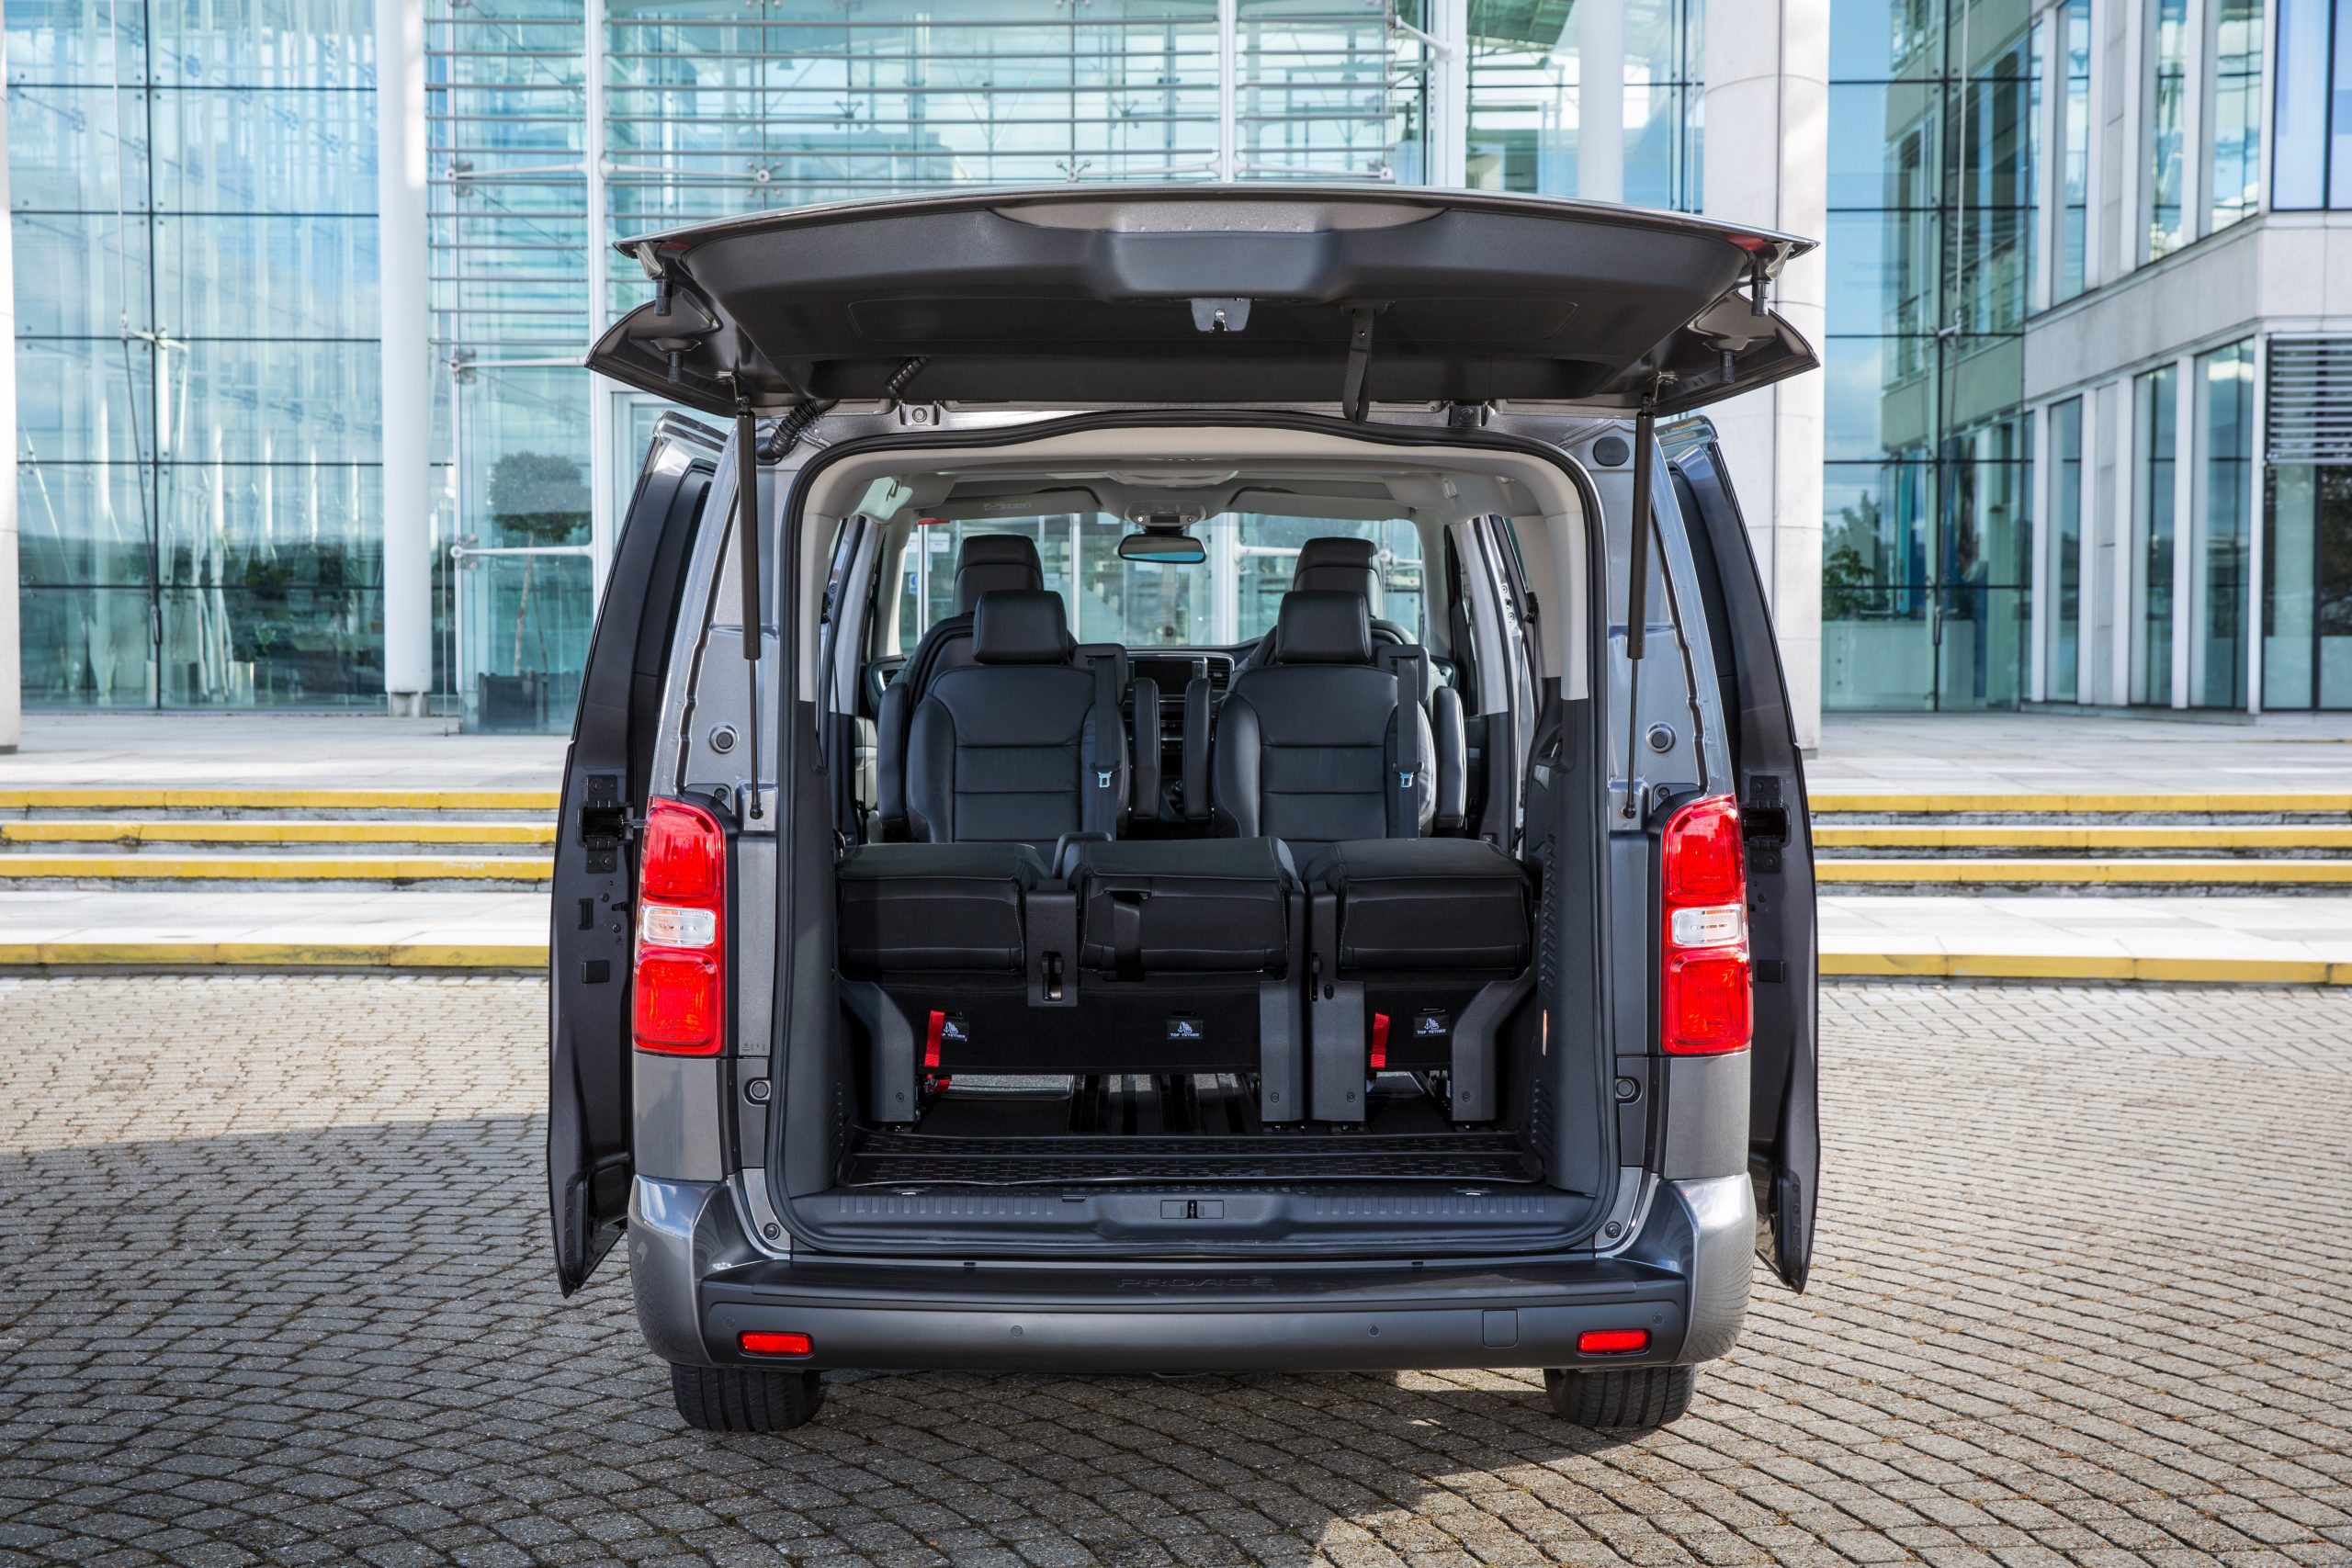 Toyota Proace City editorial stock image. Image of door - 214804964